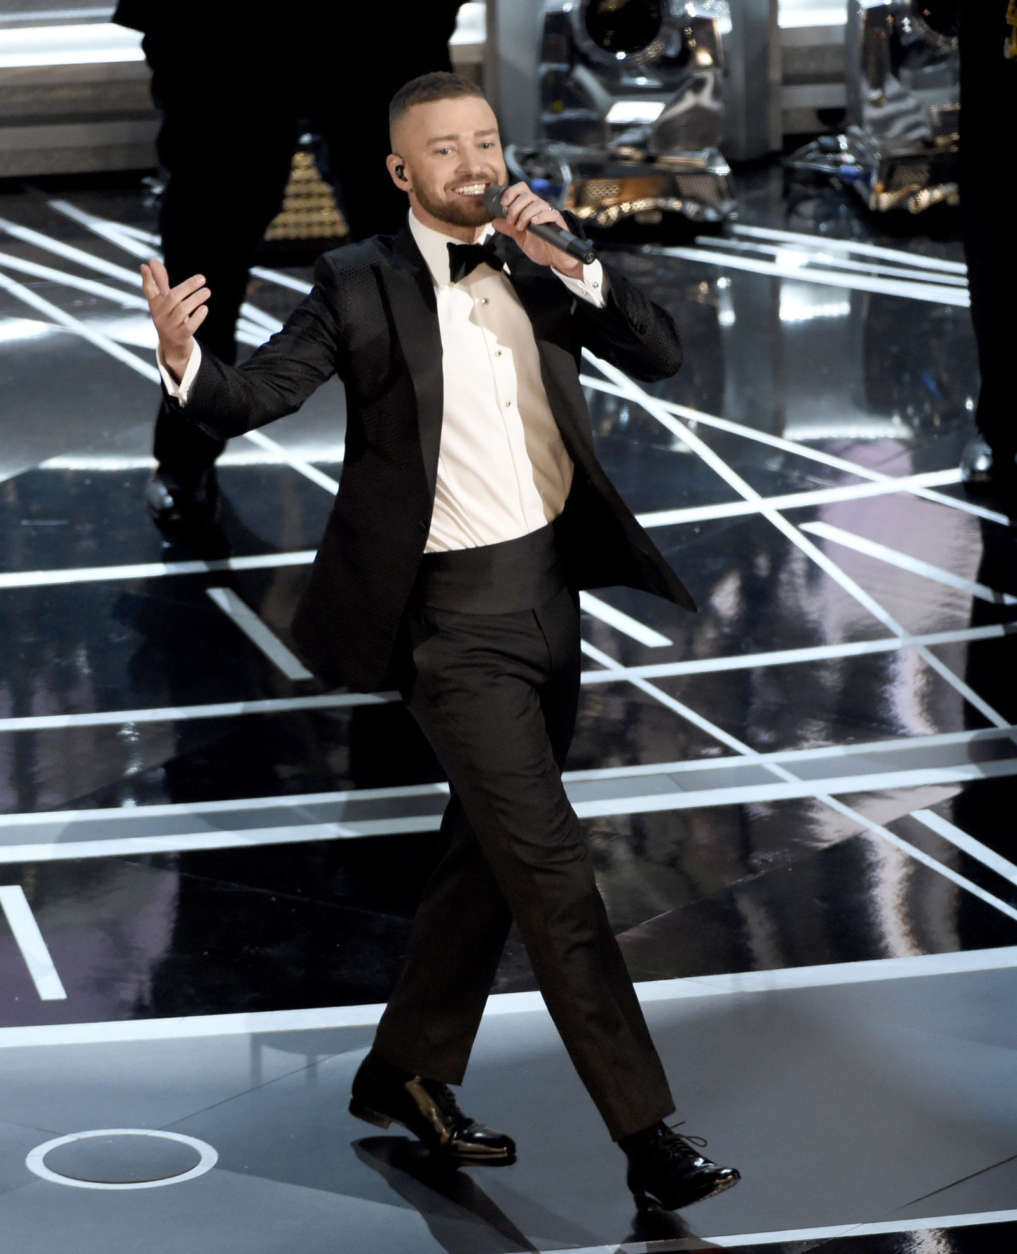 Justin Timberlake, seen here at the 2017 Academy Awards, is one of the scheduled special guests who will be appearing at the Concert for Charlottesville. (Photo by Chris Pizzello/Invision/AP)